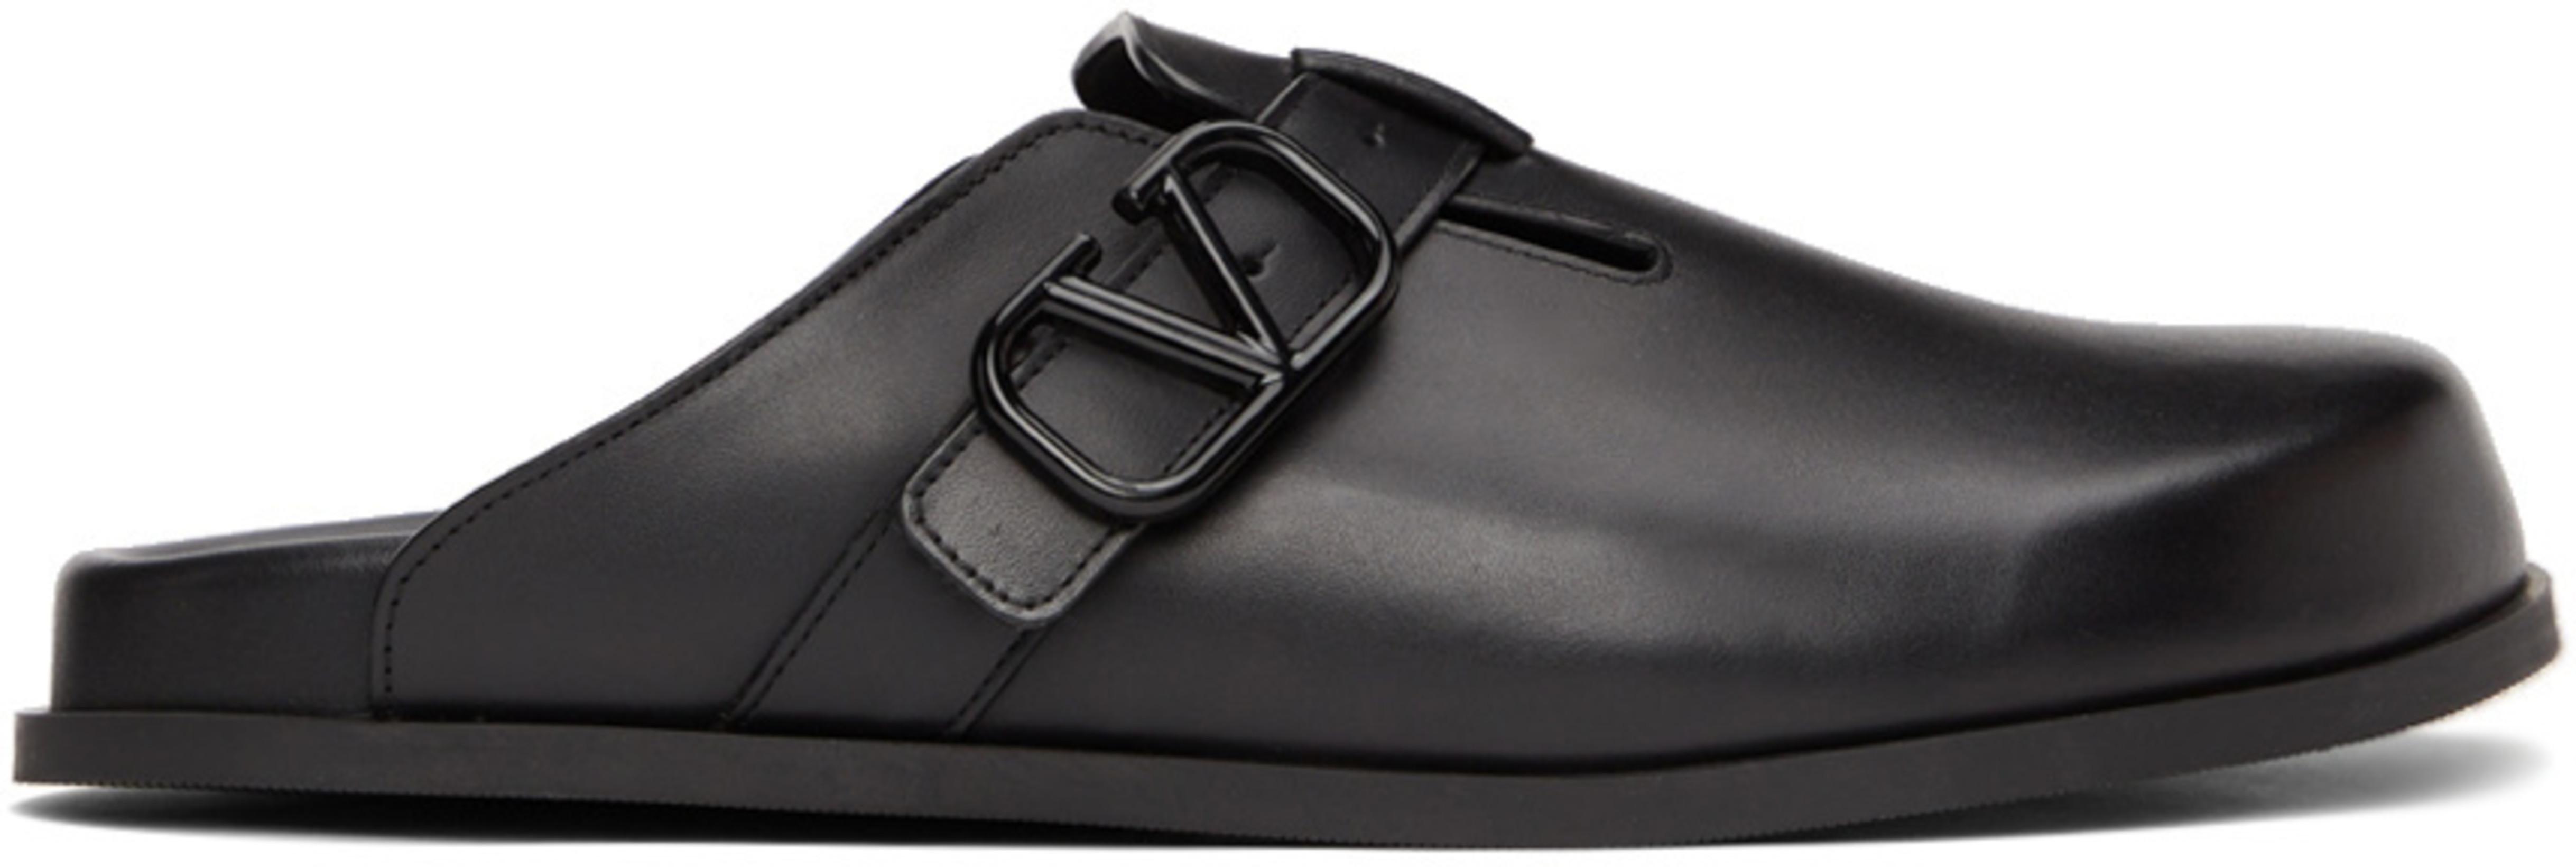 Black Sabot Loafers by VALENTINO